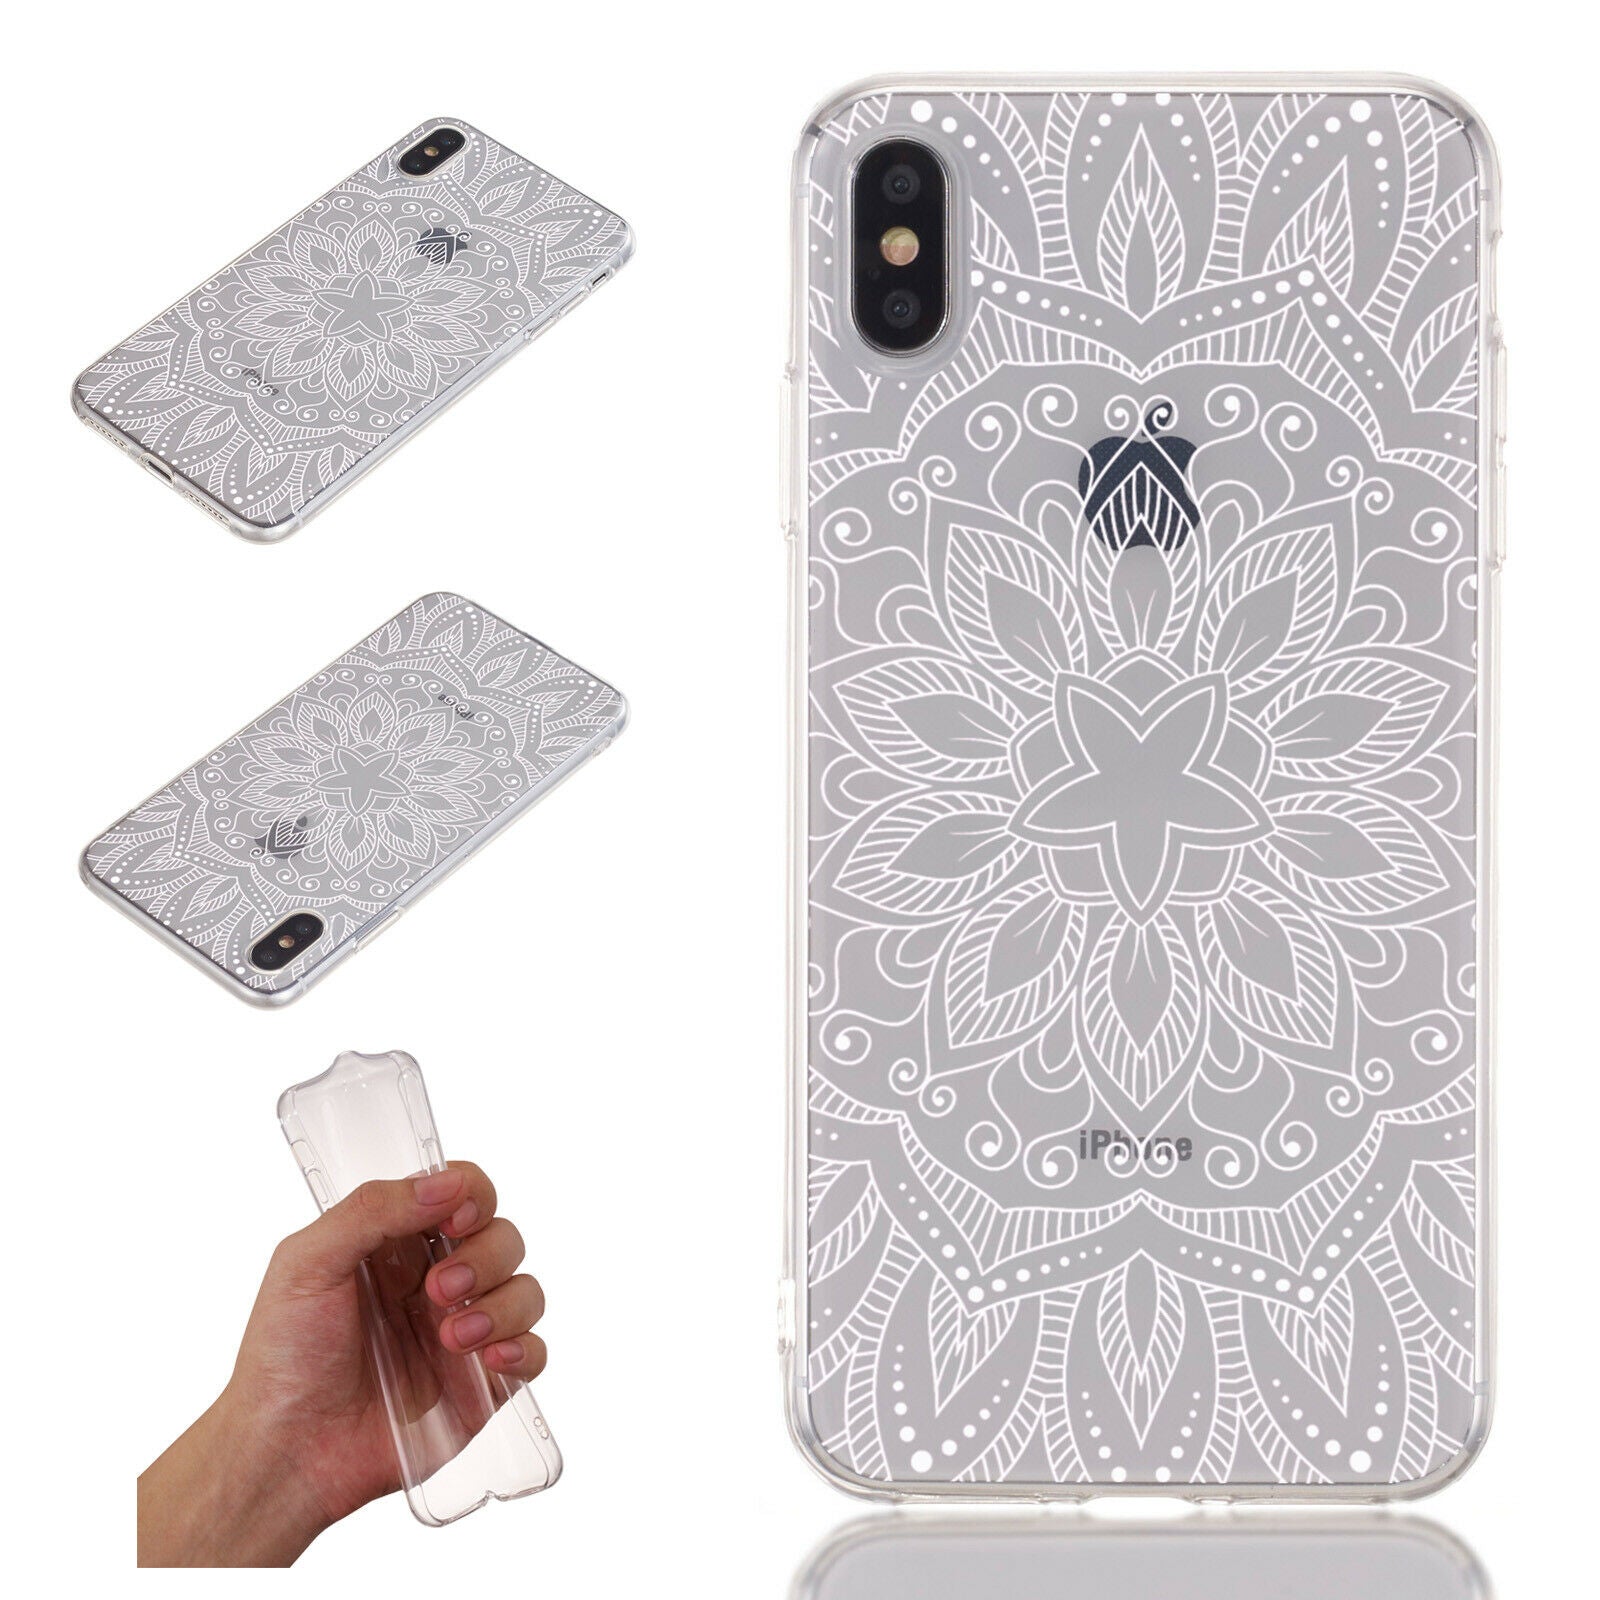 Flower Pattern Clear Soft Ultra Slim Back Case For iPhone